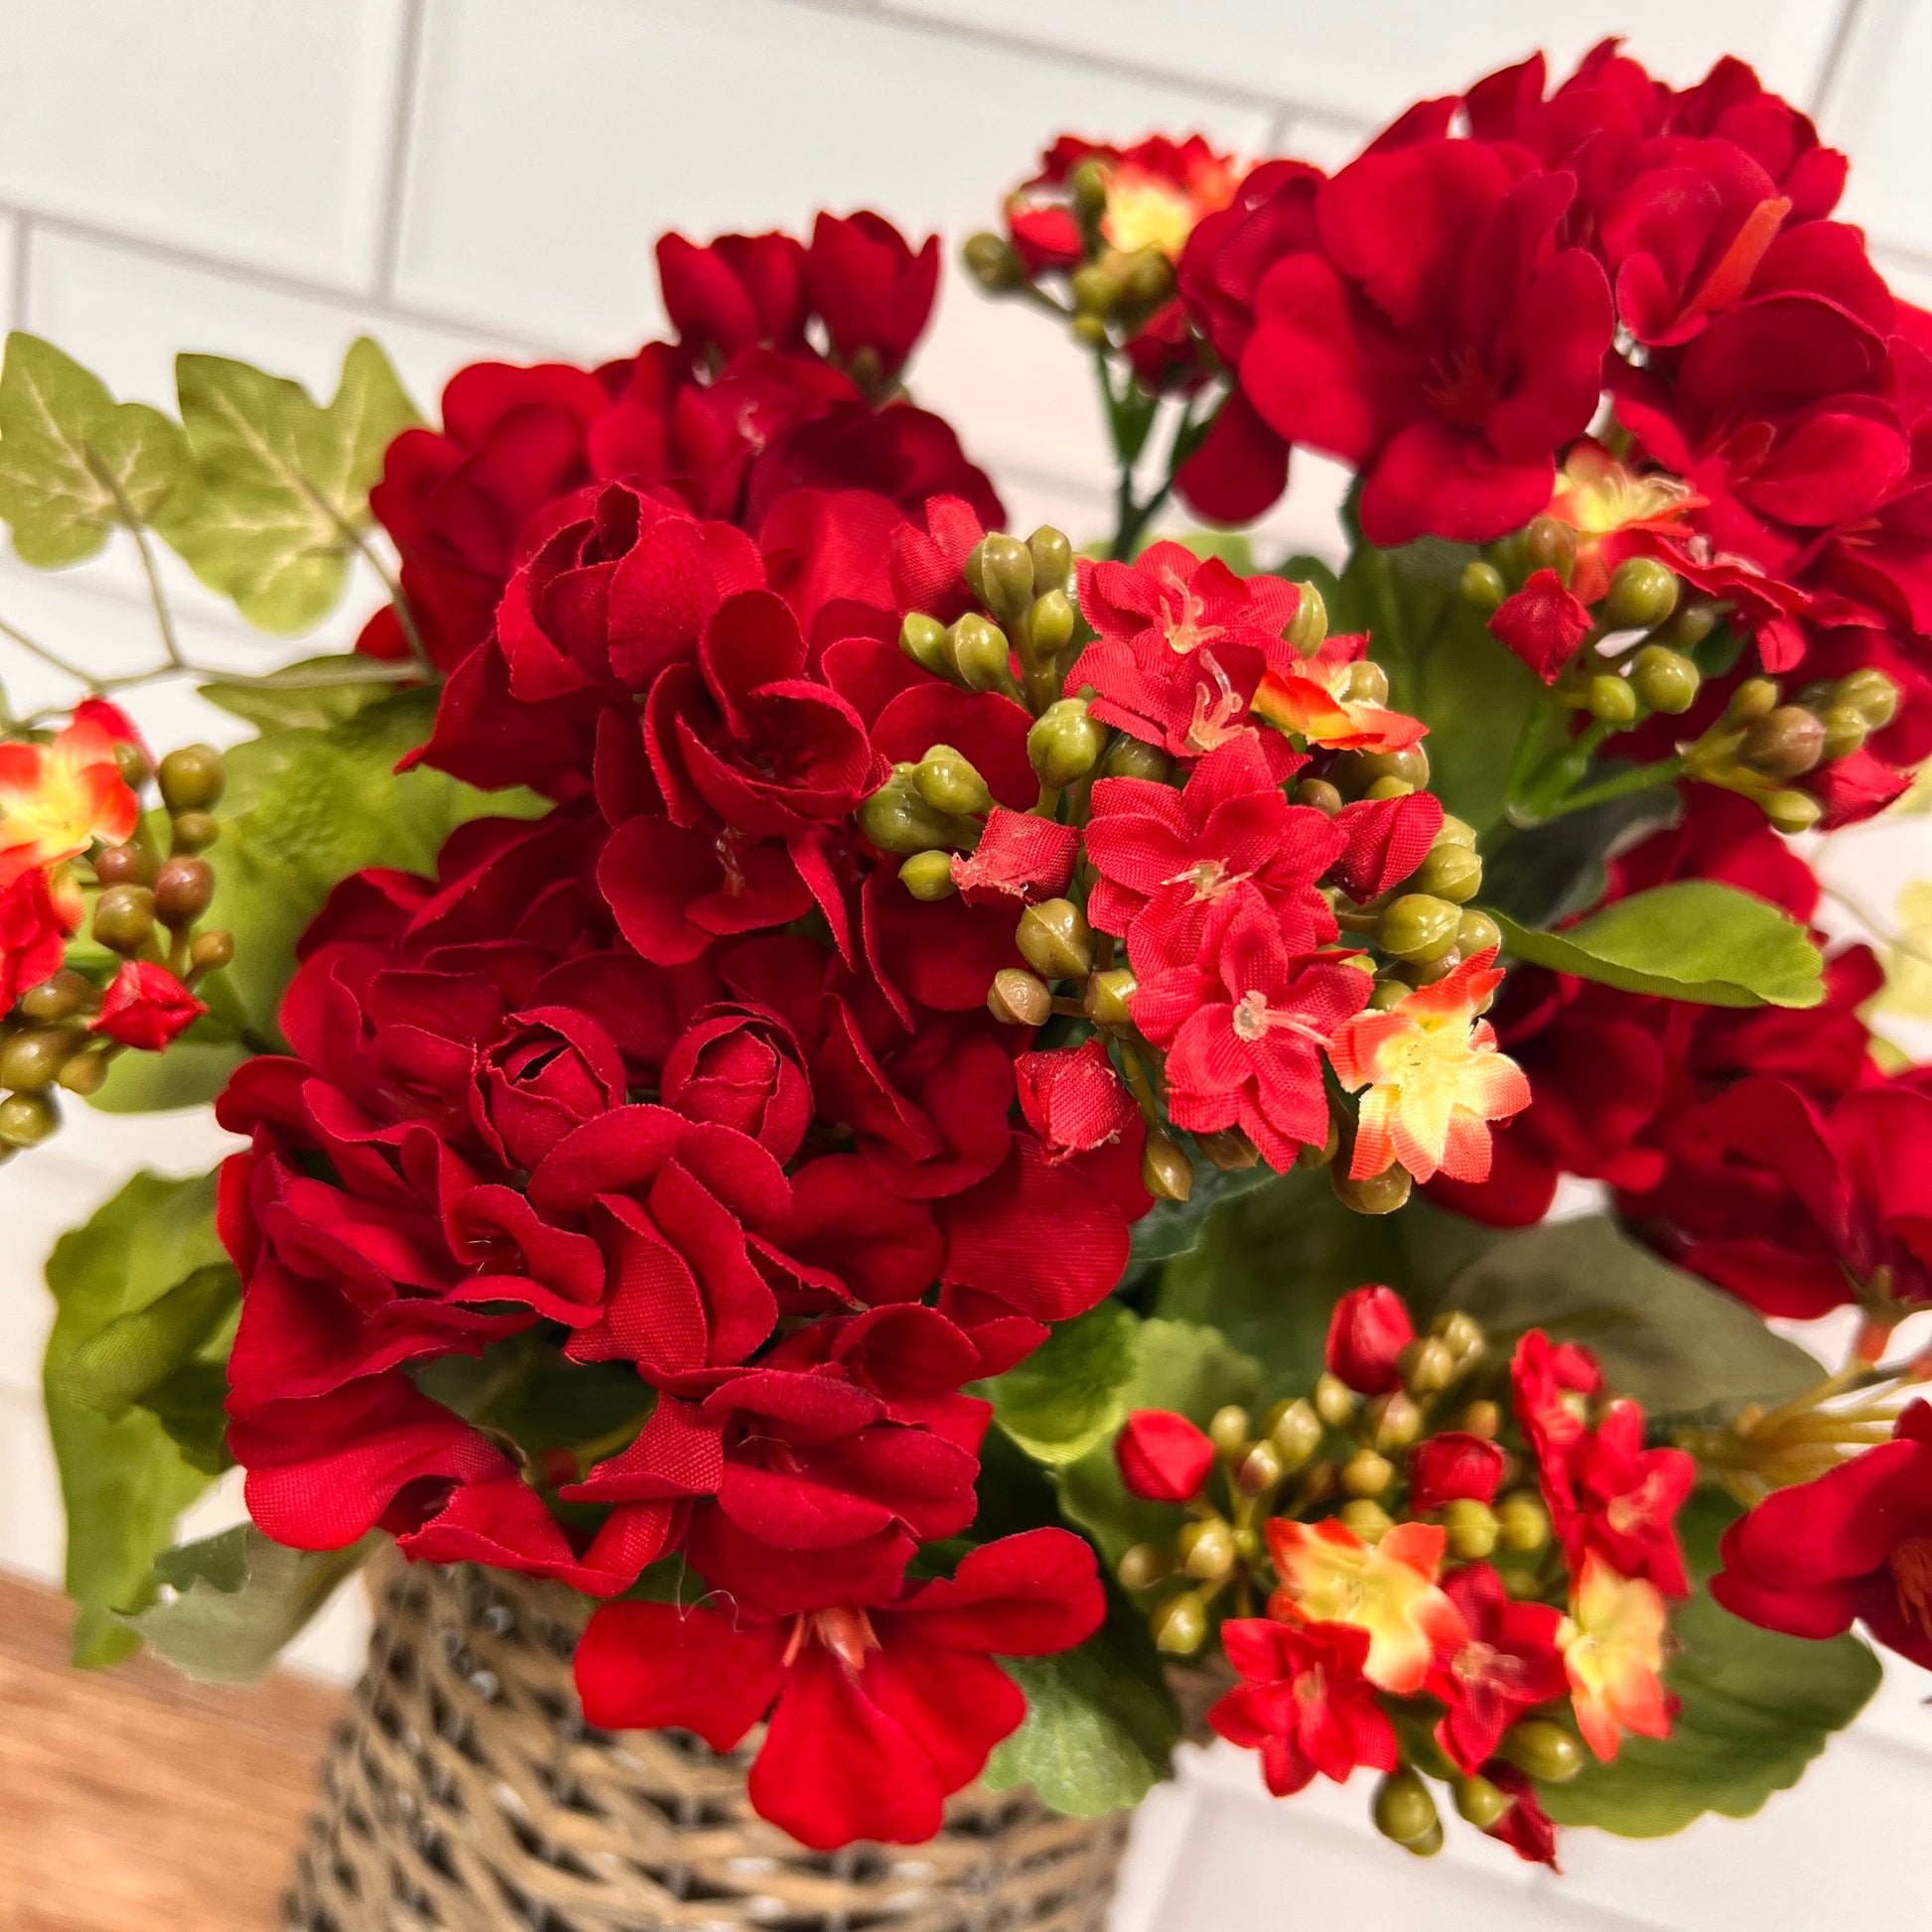 close-up of red geraniums in a woven vase.